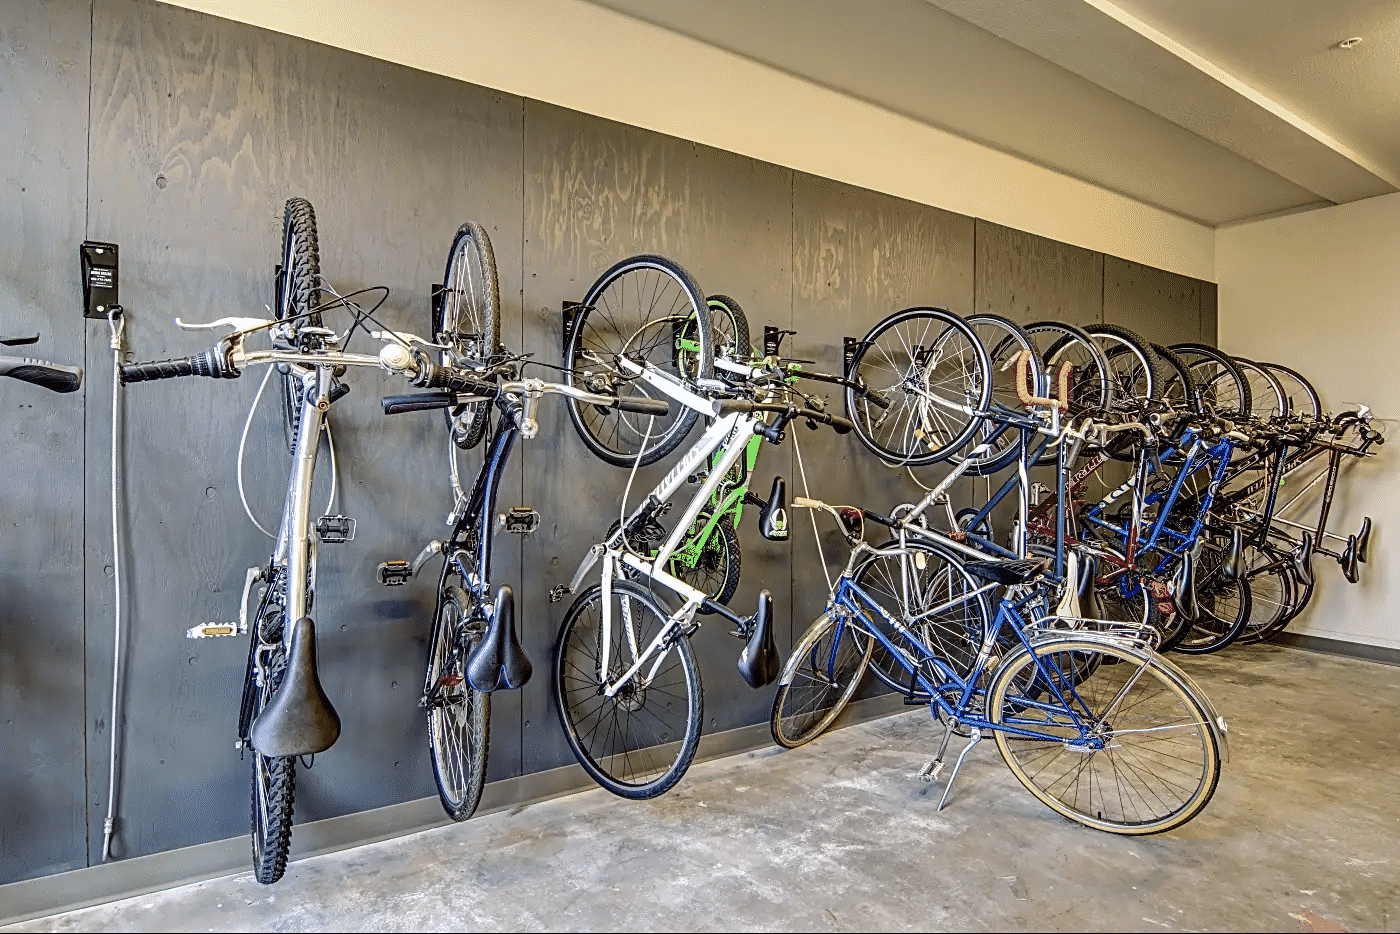 Bicycle storage room with bikes hanging on the wall